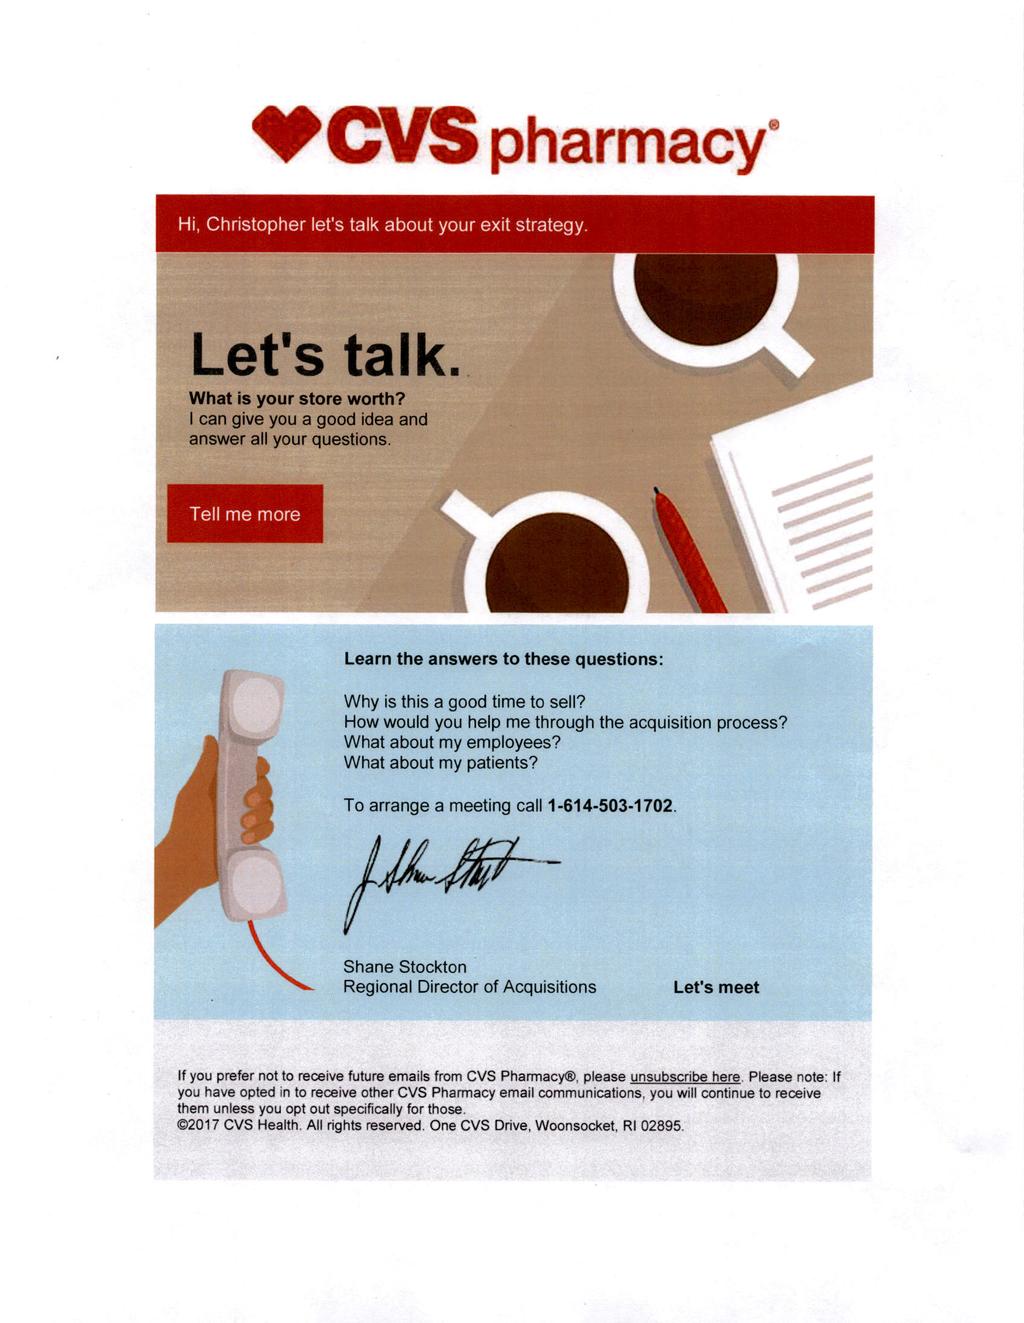 ^CVS pharmacy Hi, Christopher let's talk about your exit strategy. Let's talk What is your store worth? I can give you a good idea and answer all your questions.